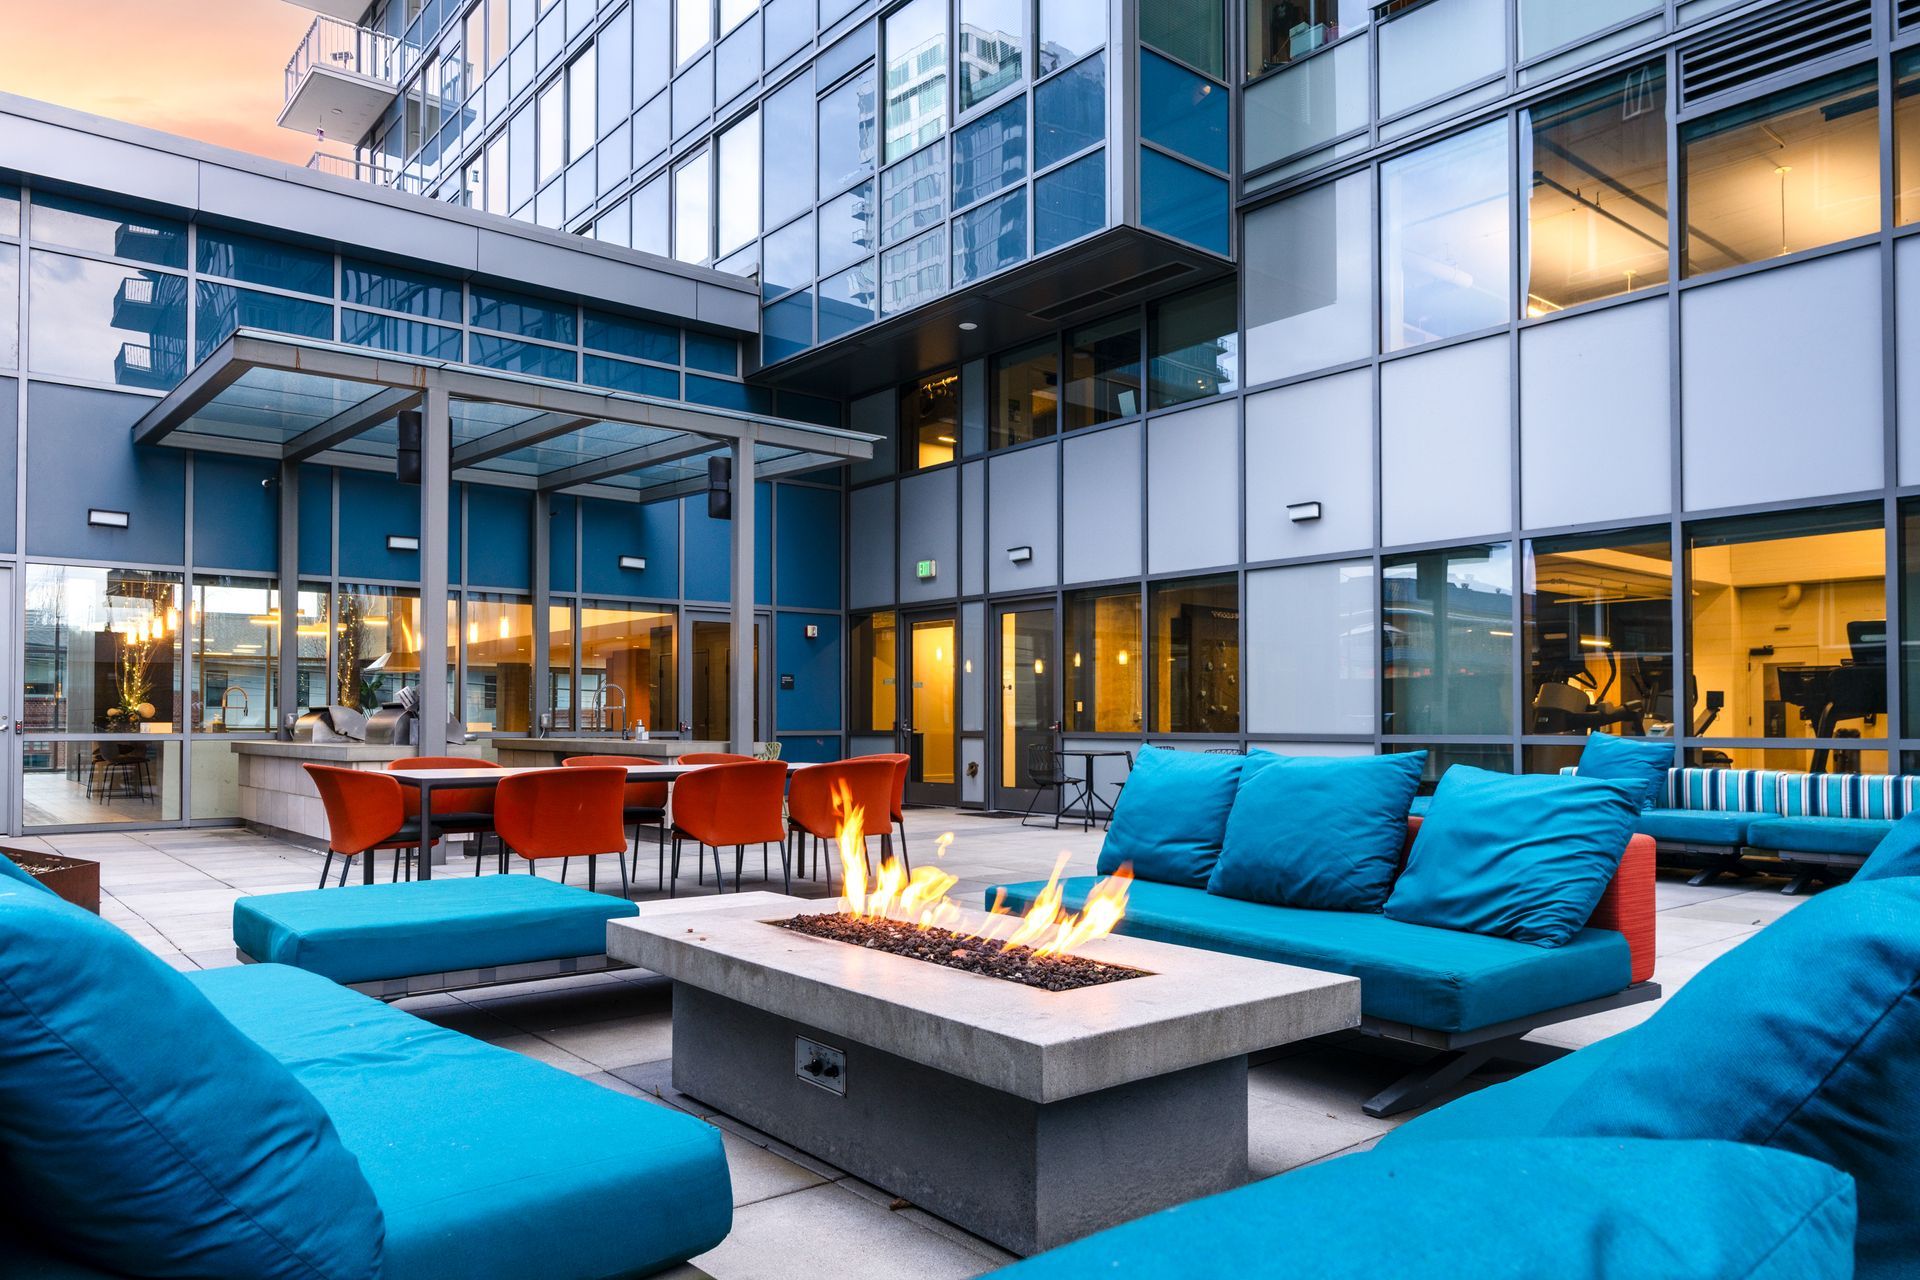 A patio with blue furniture and a fire pit in front of a building.